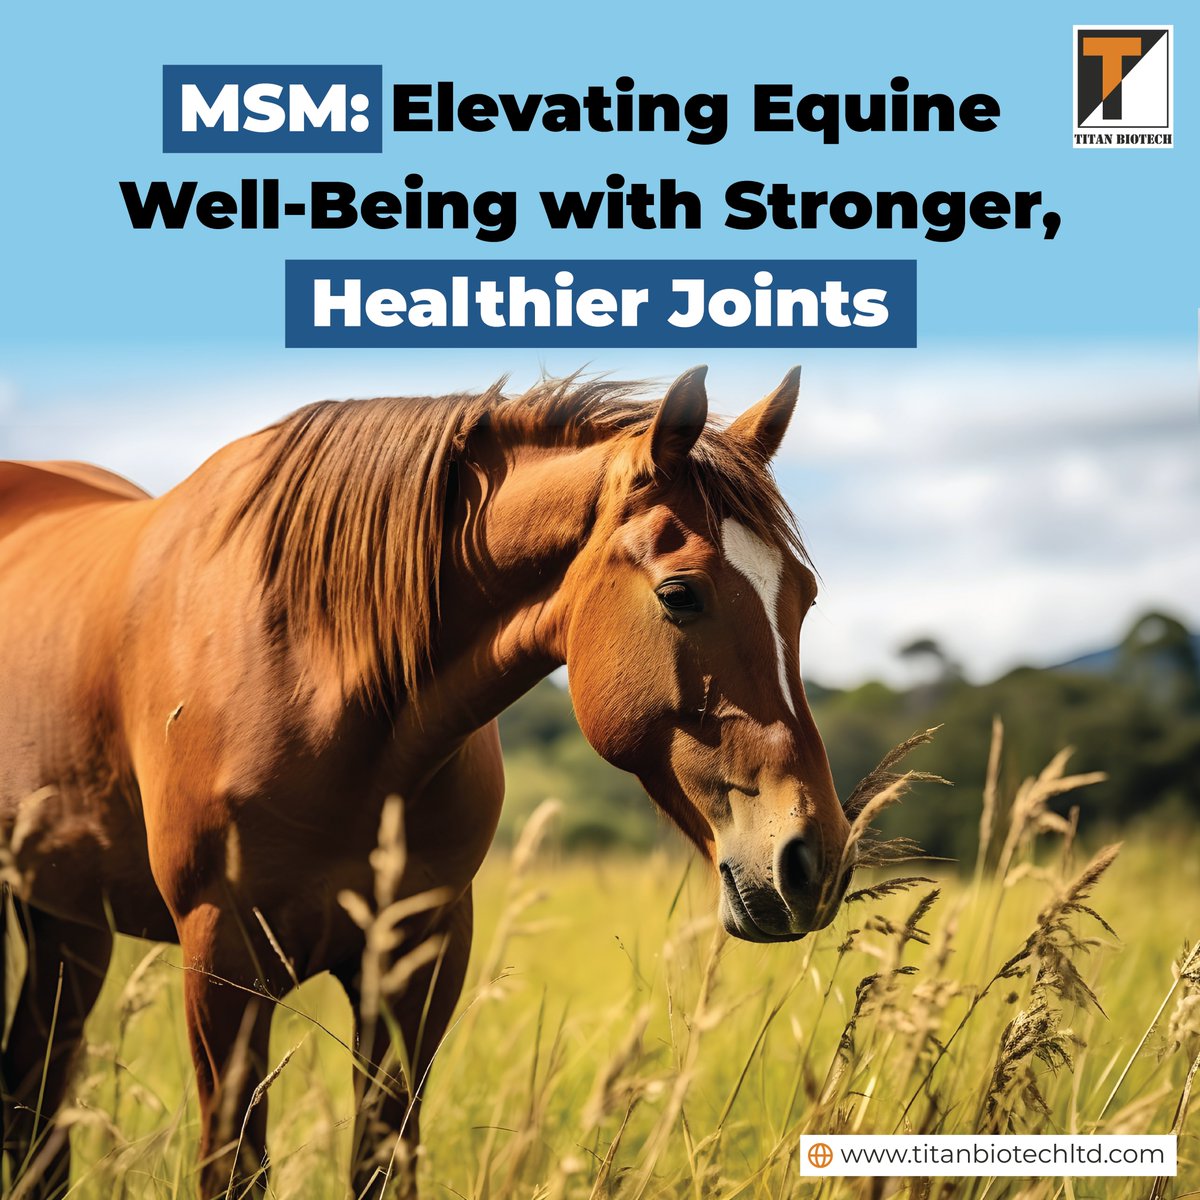 MSM – The essential ingredient for promoting robust and healthier joints, enhancing agility and comfort. Discover the secret to peak performance and freedom of movement.

Visit us at  titanbiotechltd.com

#titanbiotechltd #msm #equinewellness #horsehealth #jointsupplements